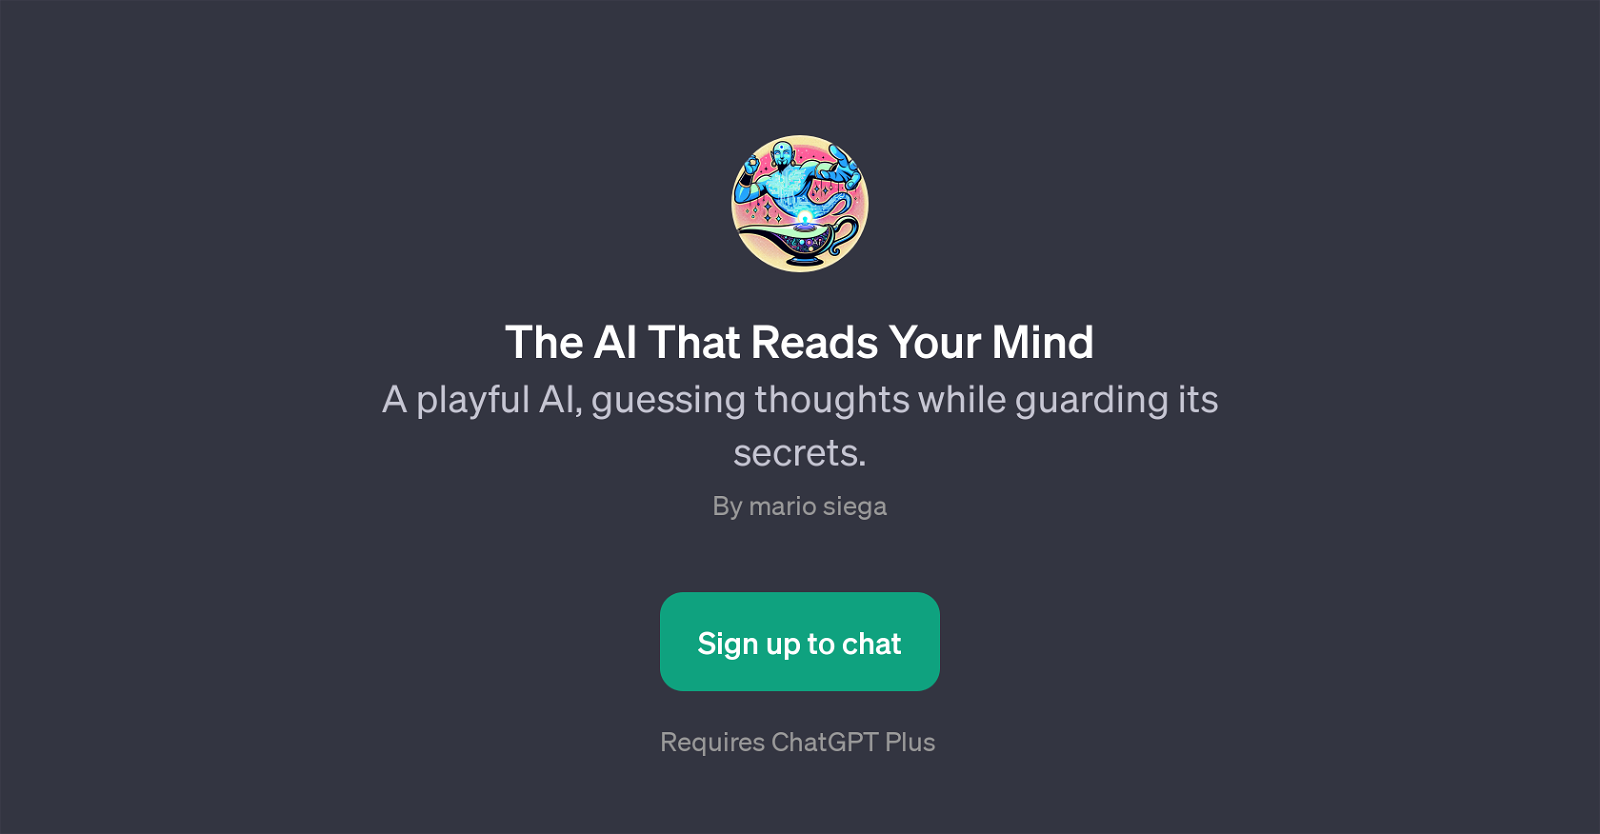 The AI That Reads Your Mind website